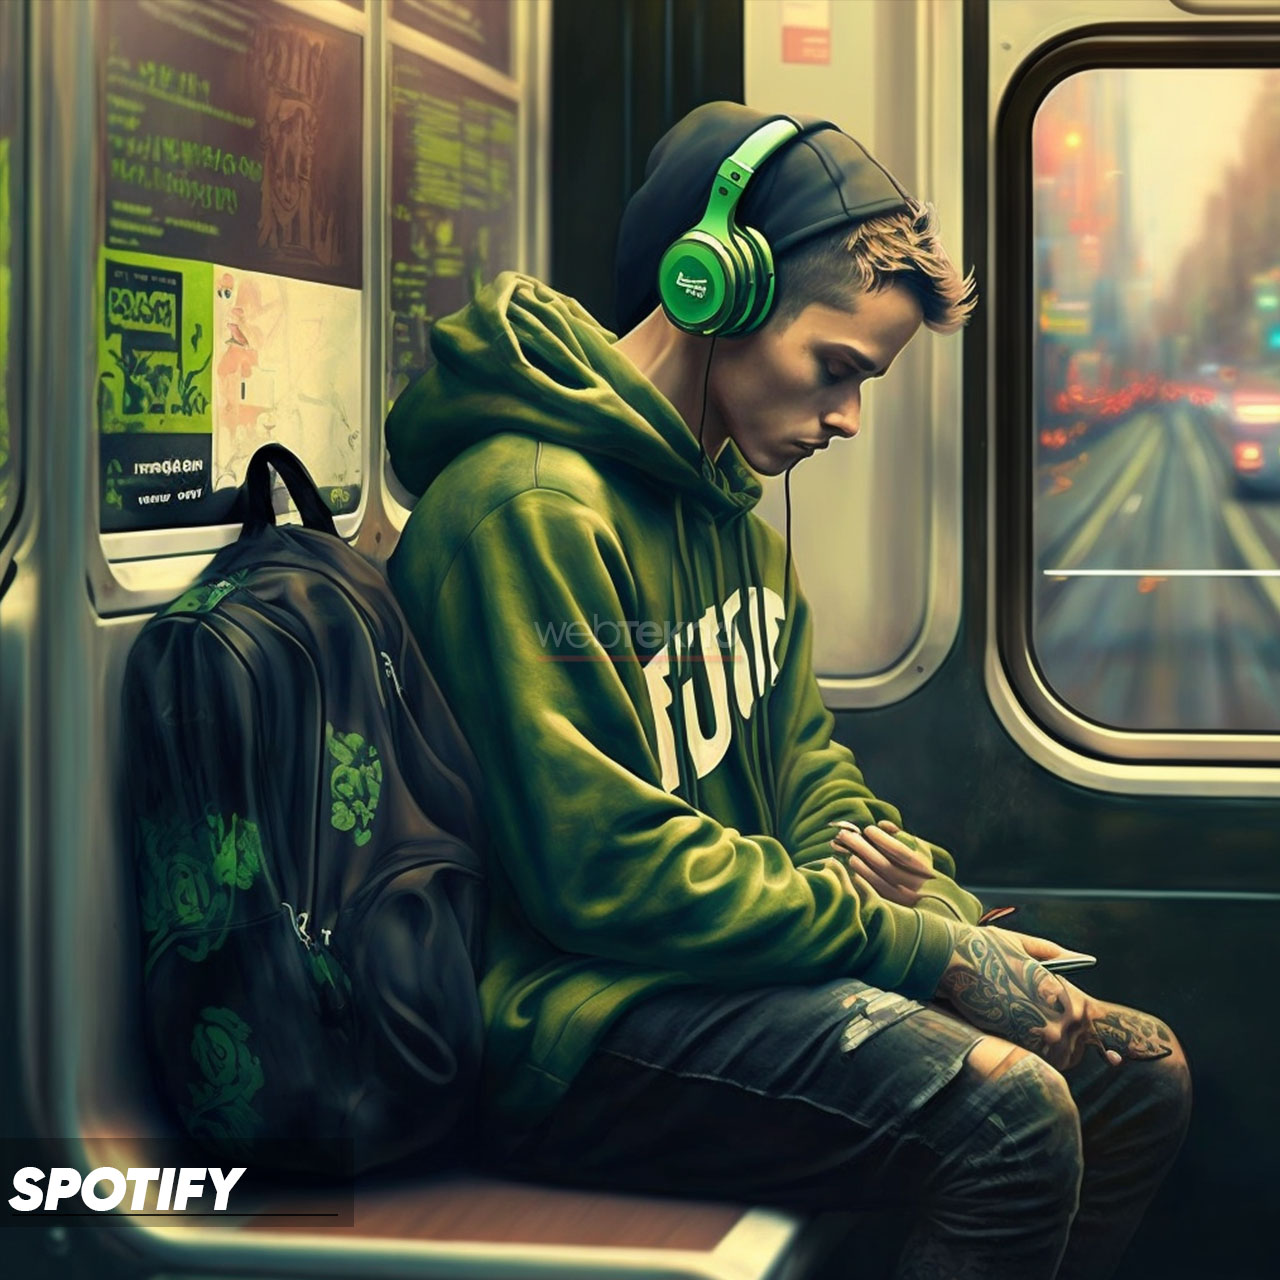 What if Spotify were human?